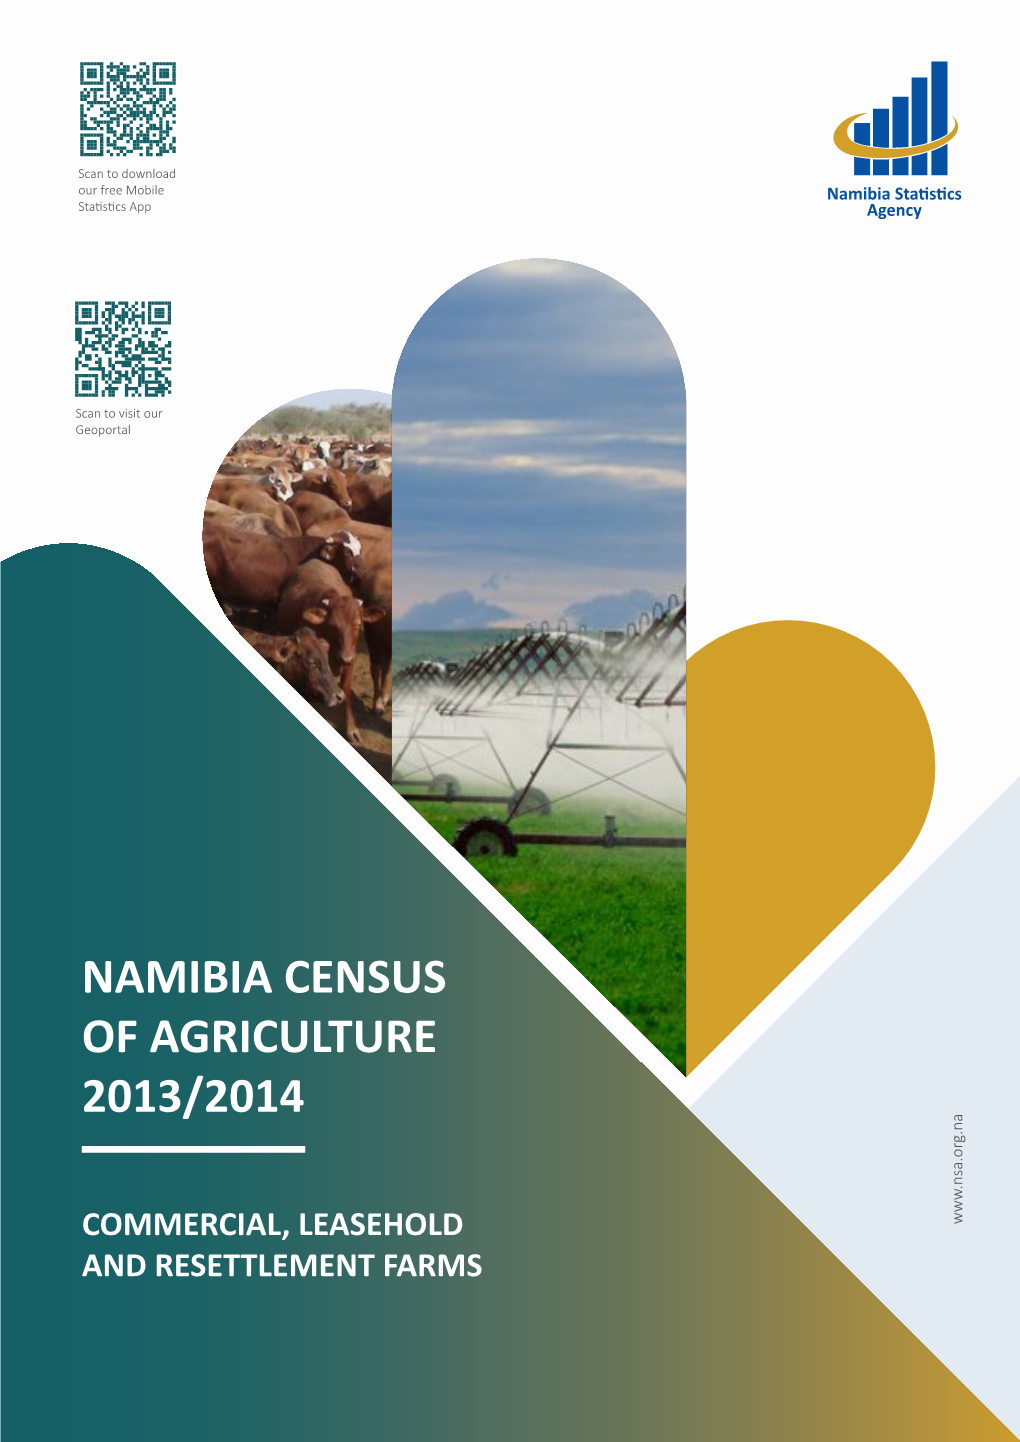 Namibia Census of Agriculture 2013/2014